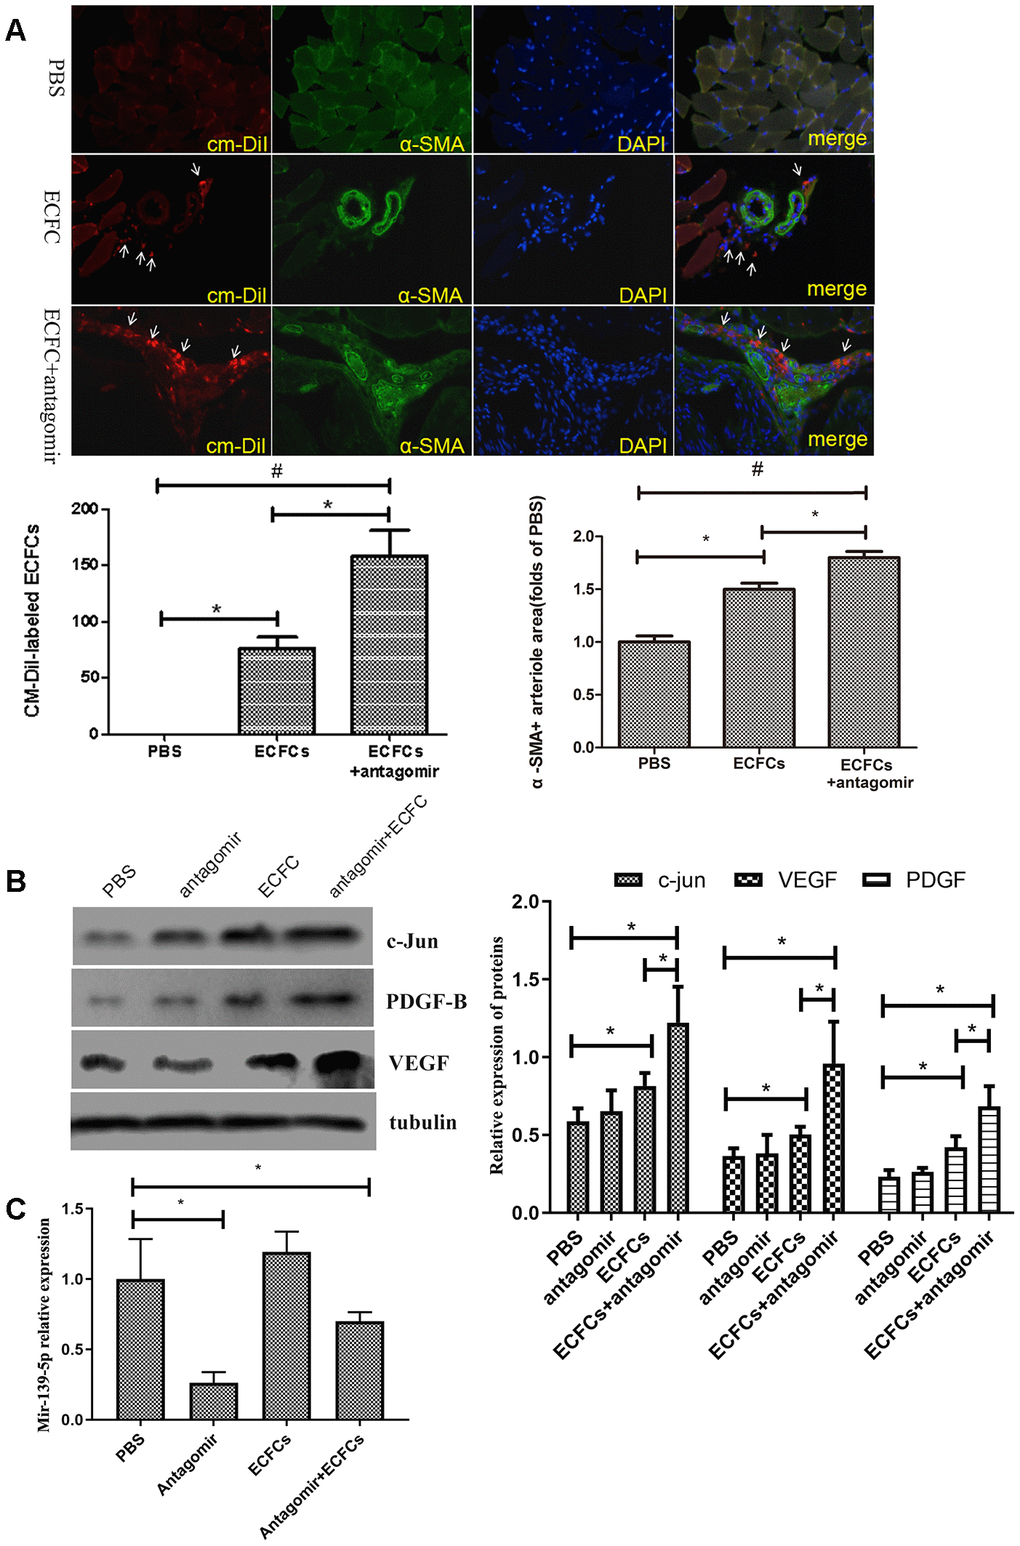 The molecular changes in HLI diabetic mice after injecting miR-139-5p antagomir or ECFCs. (A) Representative fluorescent images and quantitation of CM-DiI-labeled ECFCs (red, white arrow) and alpha smooth muscle actin (α-SMA)-positive arteriole in the ischemic adductor muscle tissue (green), as well as the merged images of CM-DiI, α-SMA, and DAPI. The representative images of arteriogenesis were expressed as α-SMA-positive arteriole area under 5 high-power fields (200X) by PBS control. (N=3) *PB) C-jun, PDGF-B, and VEGF expression in gastrocnemius muscle of ischemic lower extremity. (N=3) *PC) MiR-139-5p expression in gastrocnemius muscle of ischemic lower extremity. (N=3) *P